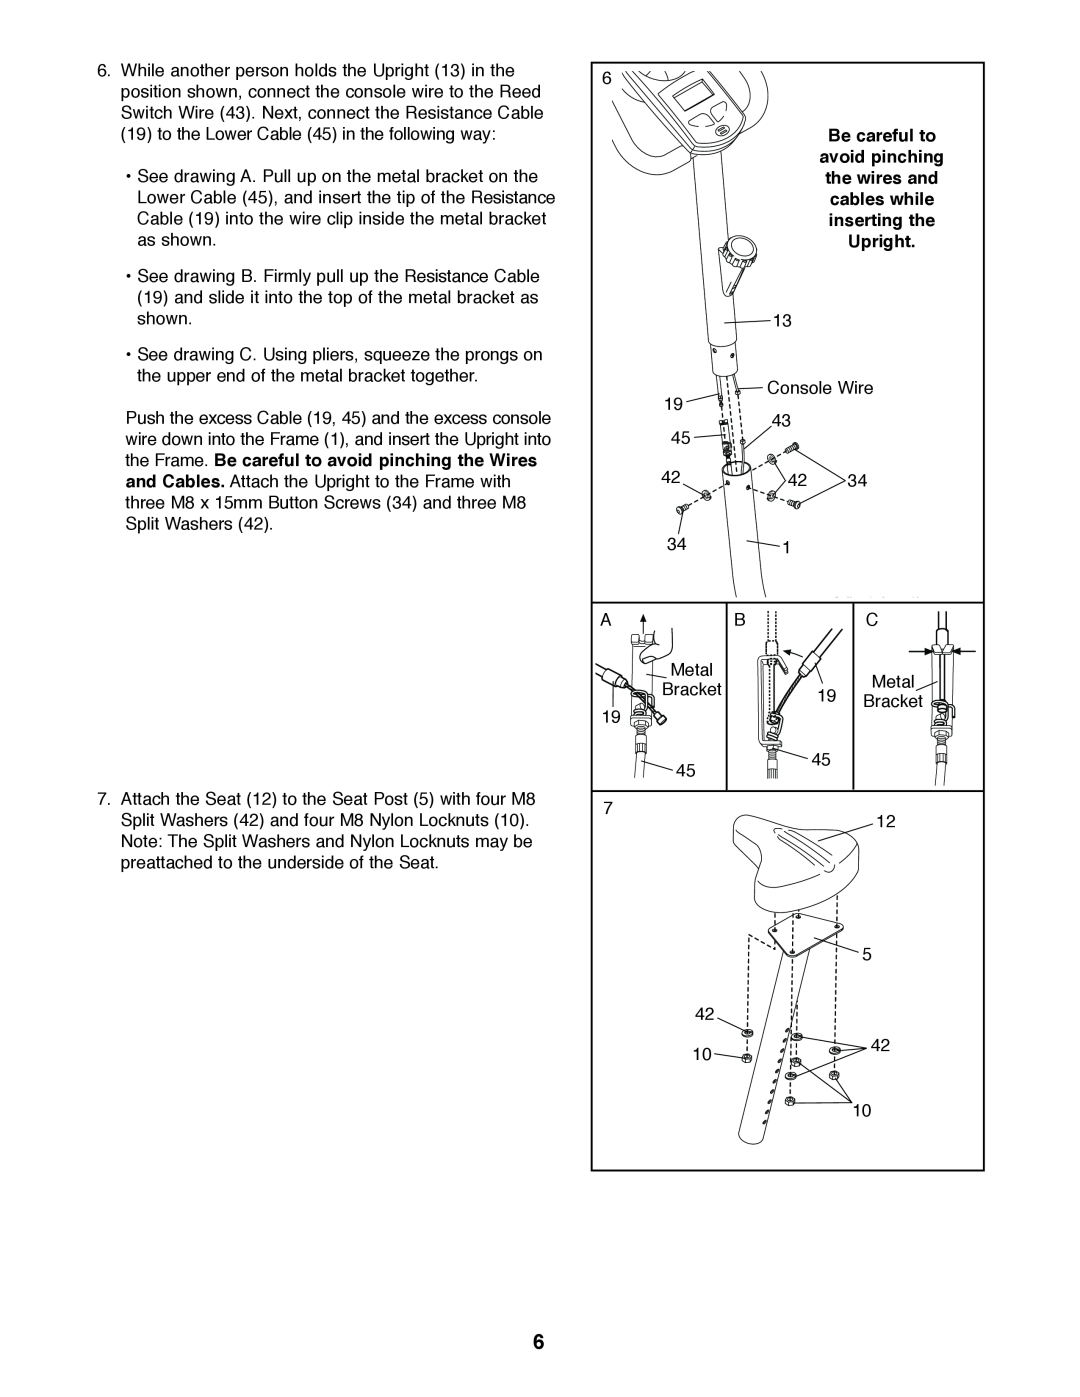 Weslo WLEX14820 user manual the wires and, inserting the, Upright, Be careful to, avoid pinching 